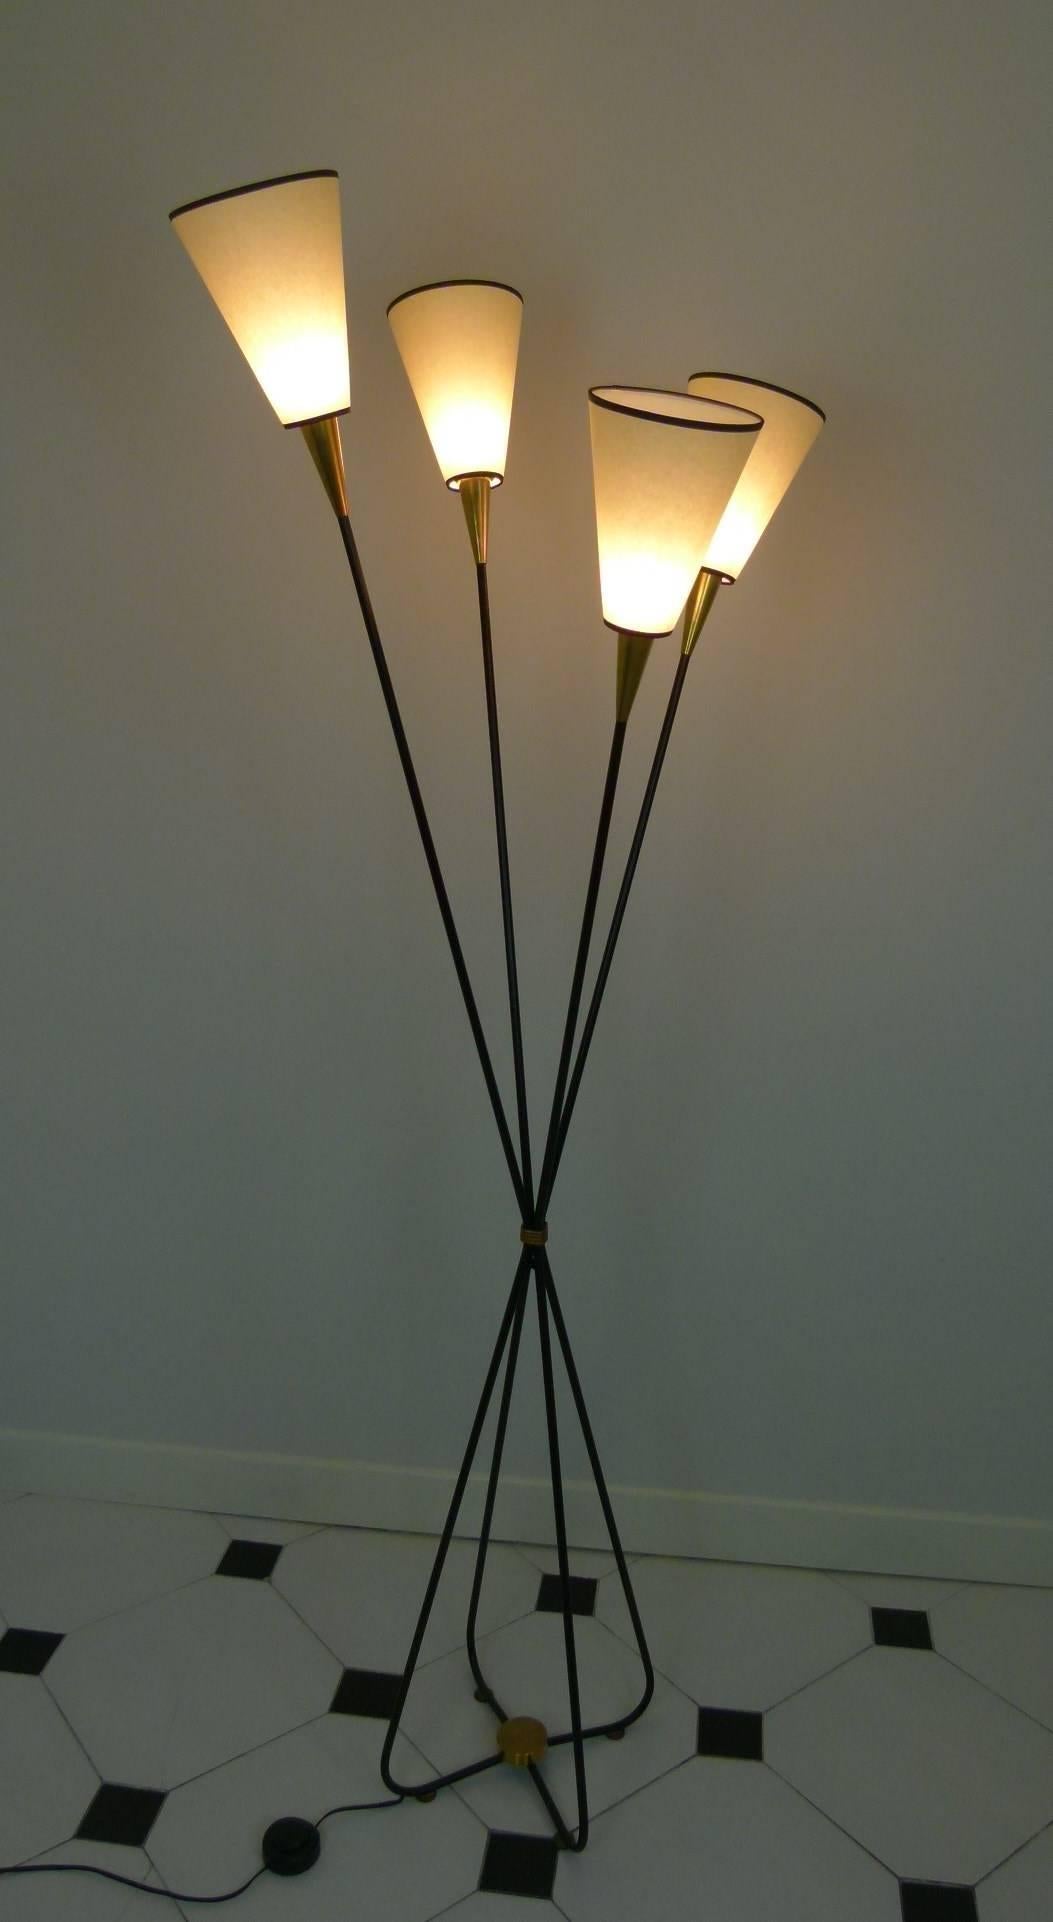 Floor lamp in black lacquered metal and brass consisting of four free-form arms in black lacquered metal.
The arms are tightened at the centre and are surrounded by a cord of brass.
They go upwards and open outwards and are terminated by brass